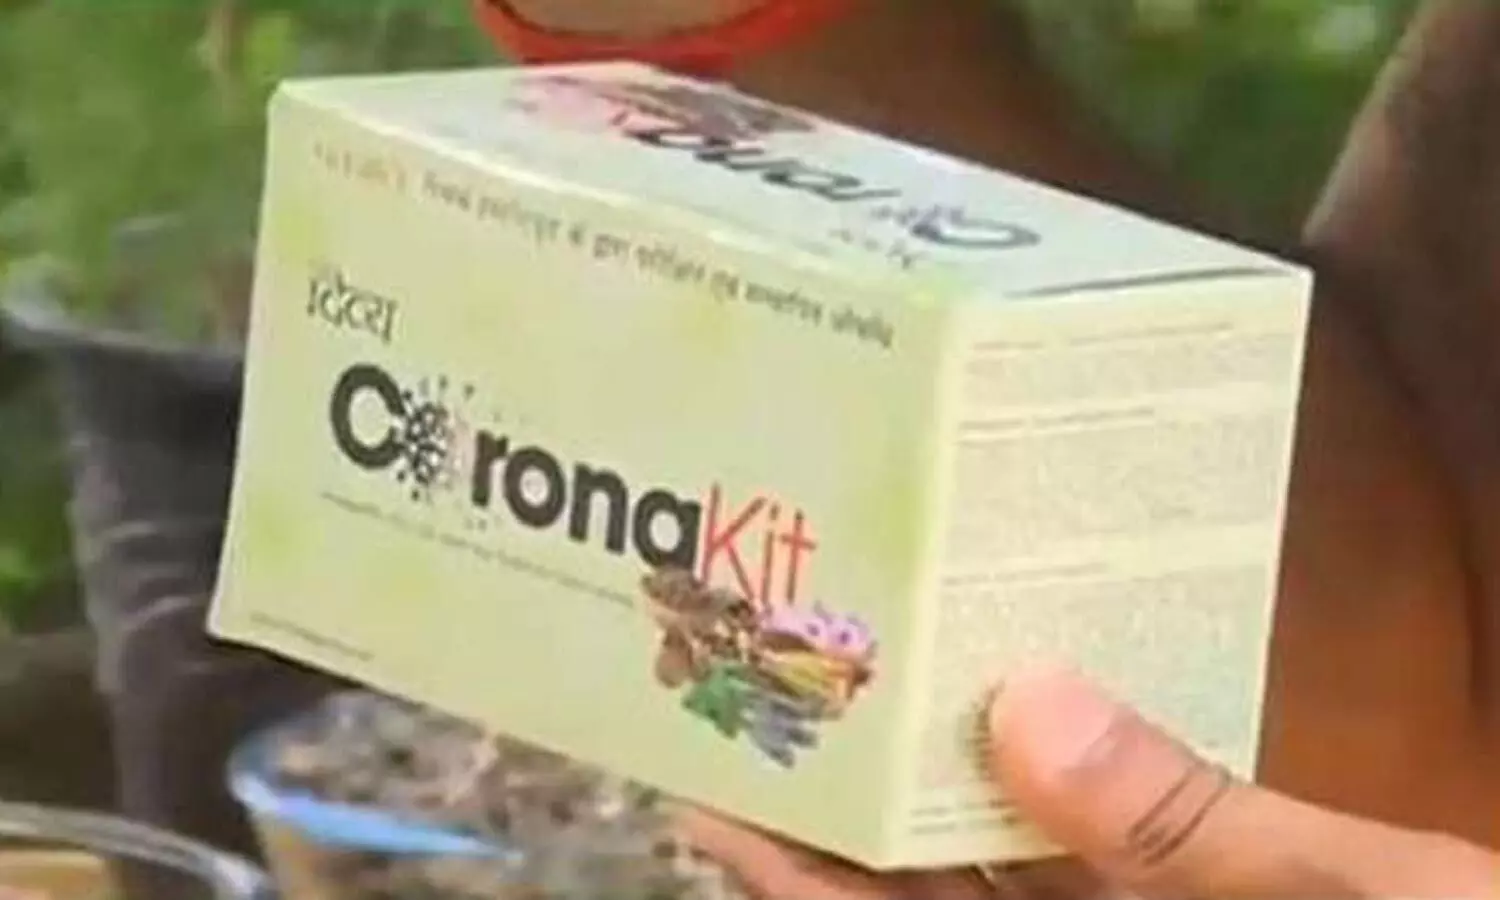 Coronil Controversy: Patanjali criticizes IMA for seeking explanation from Dr Harsh Vardhan